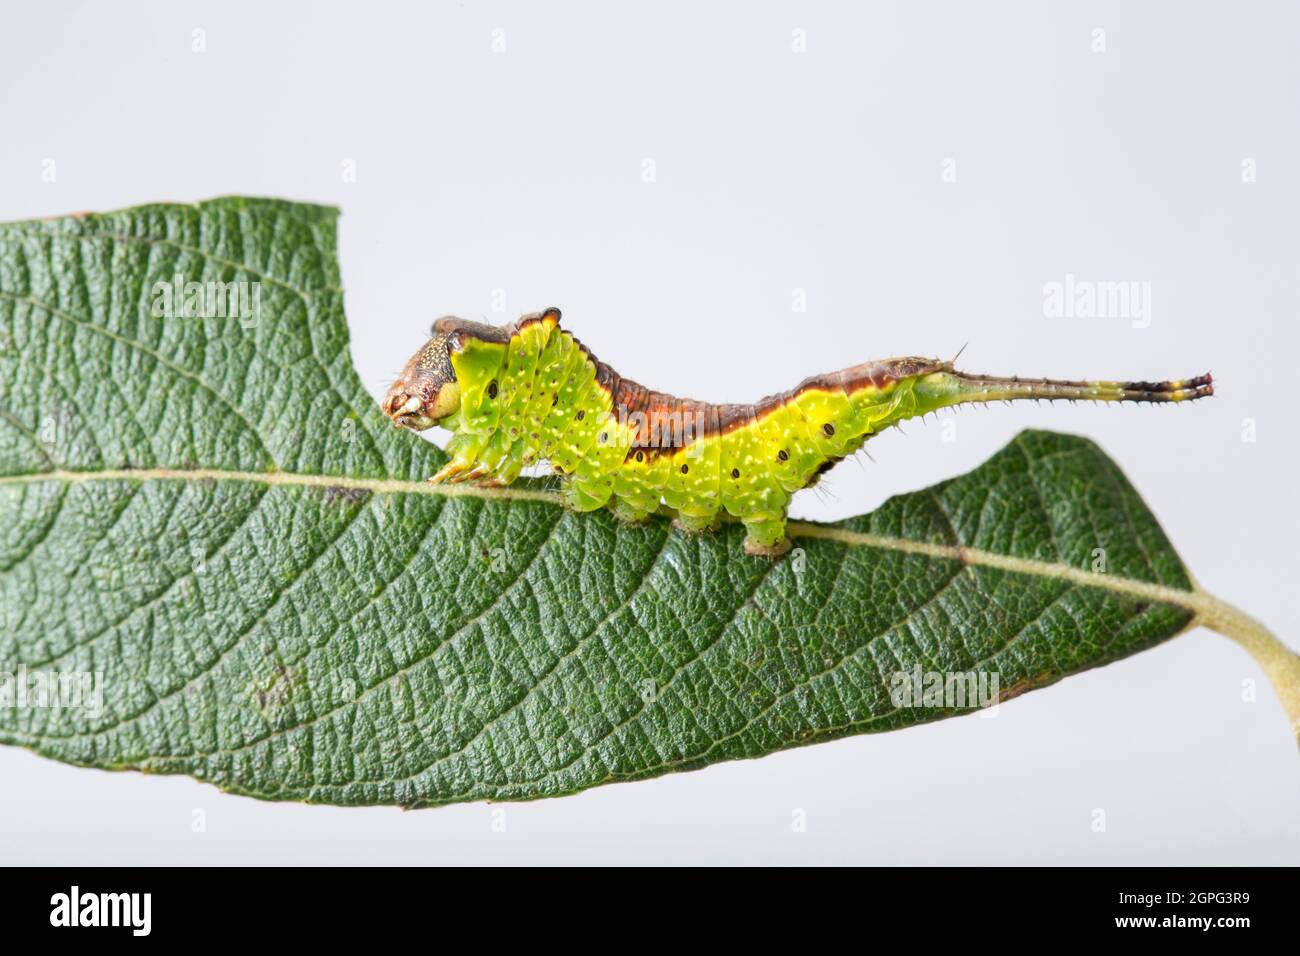 An example of a Sallow Kitten moth caterpillar, Furcula furcula, that has been feeding on a sallow leaf. Photographed in a studio on a white backgroun Stock Photo